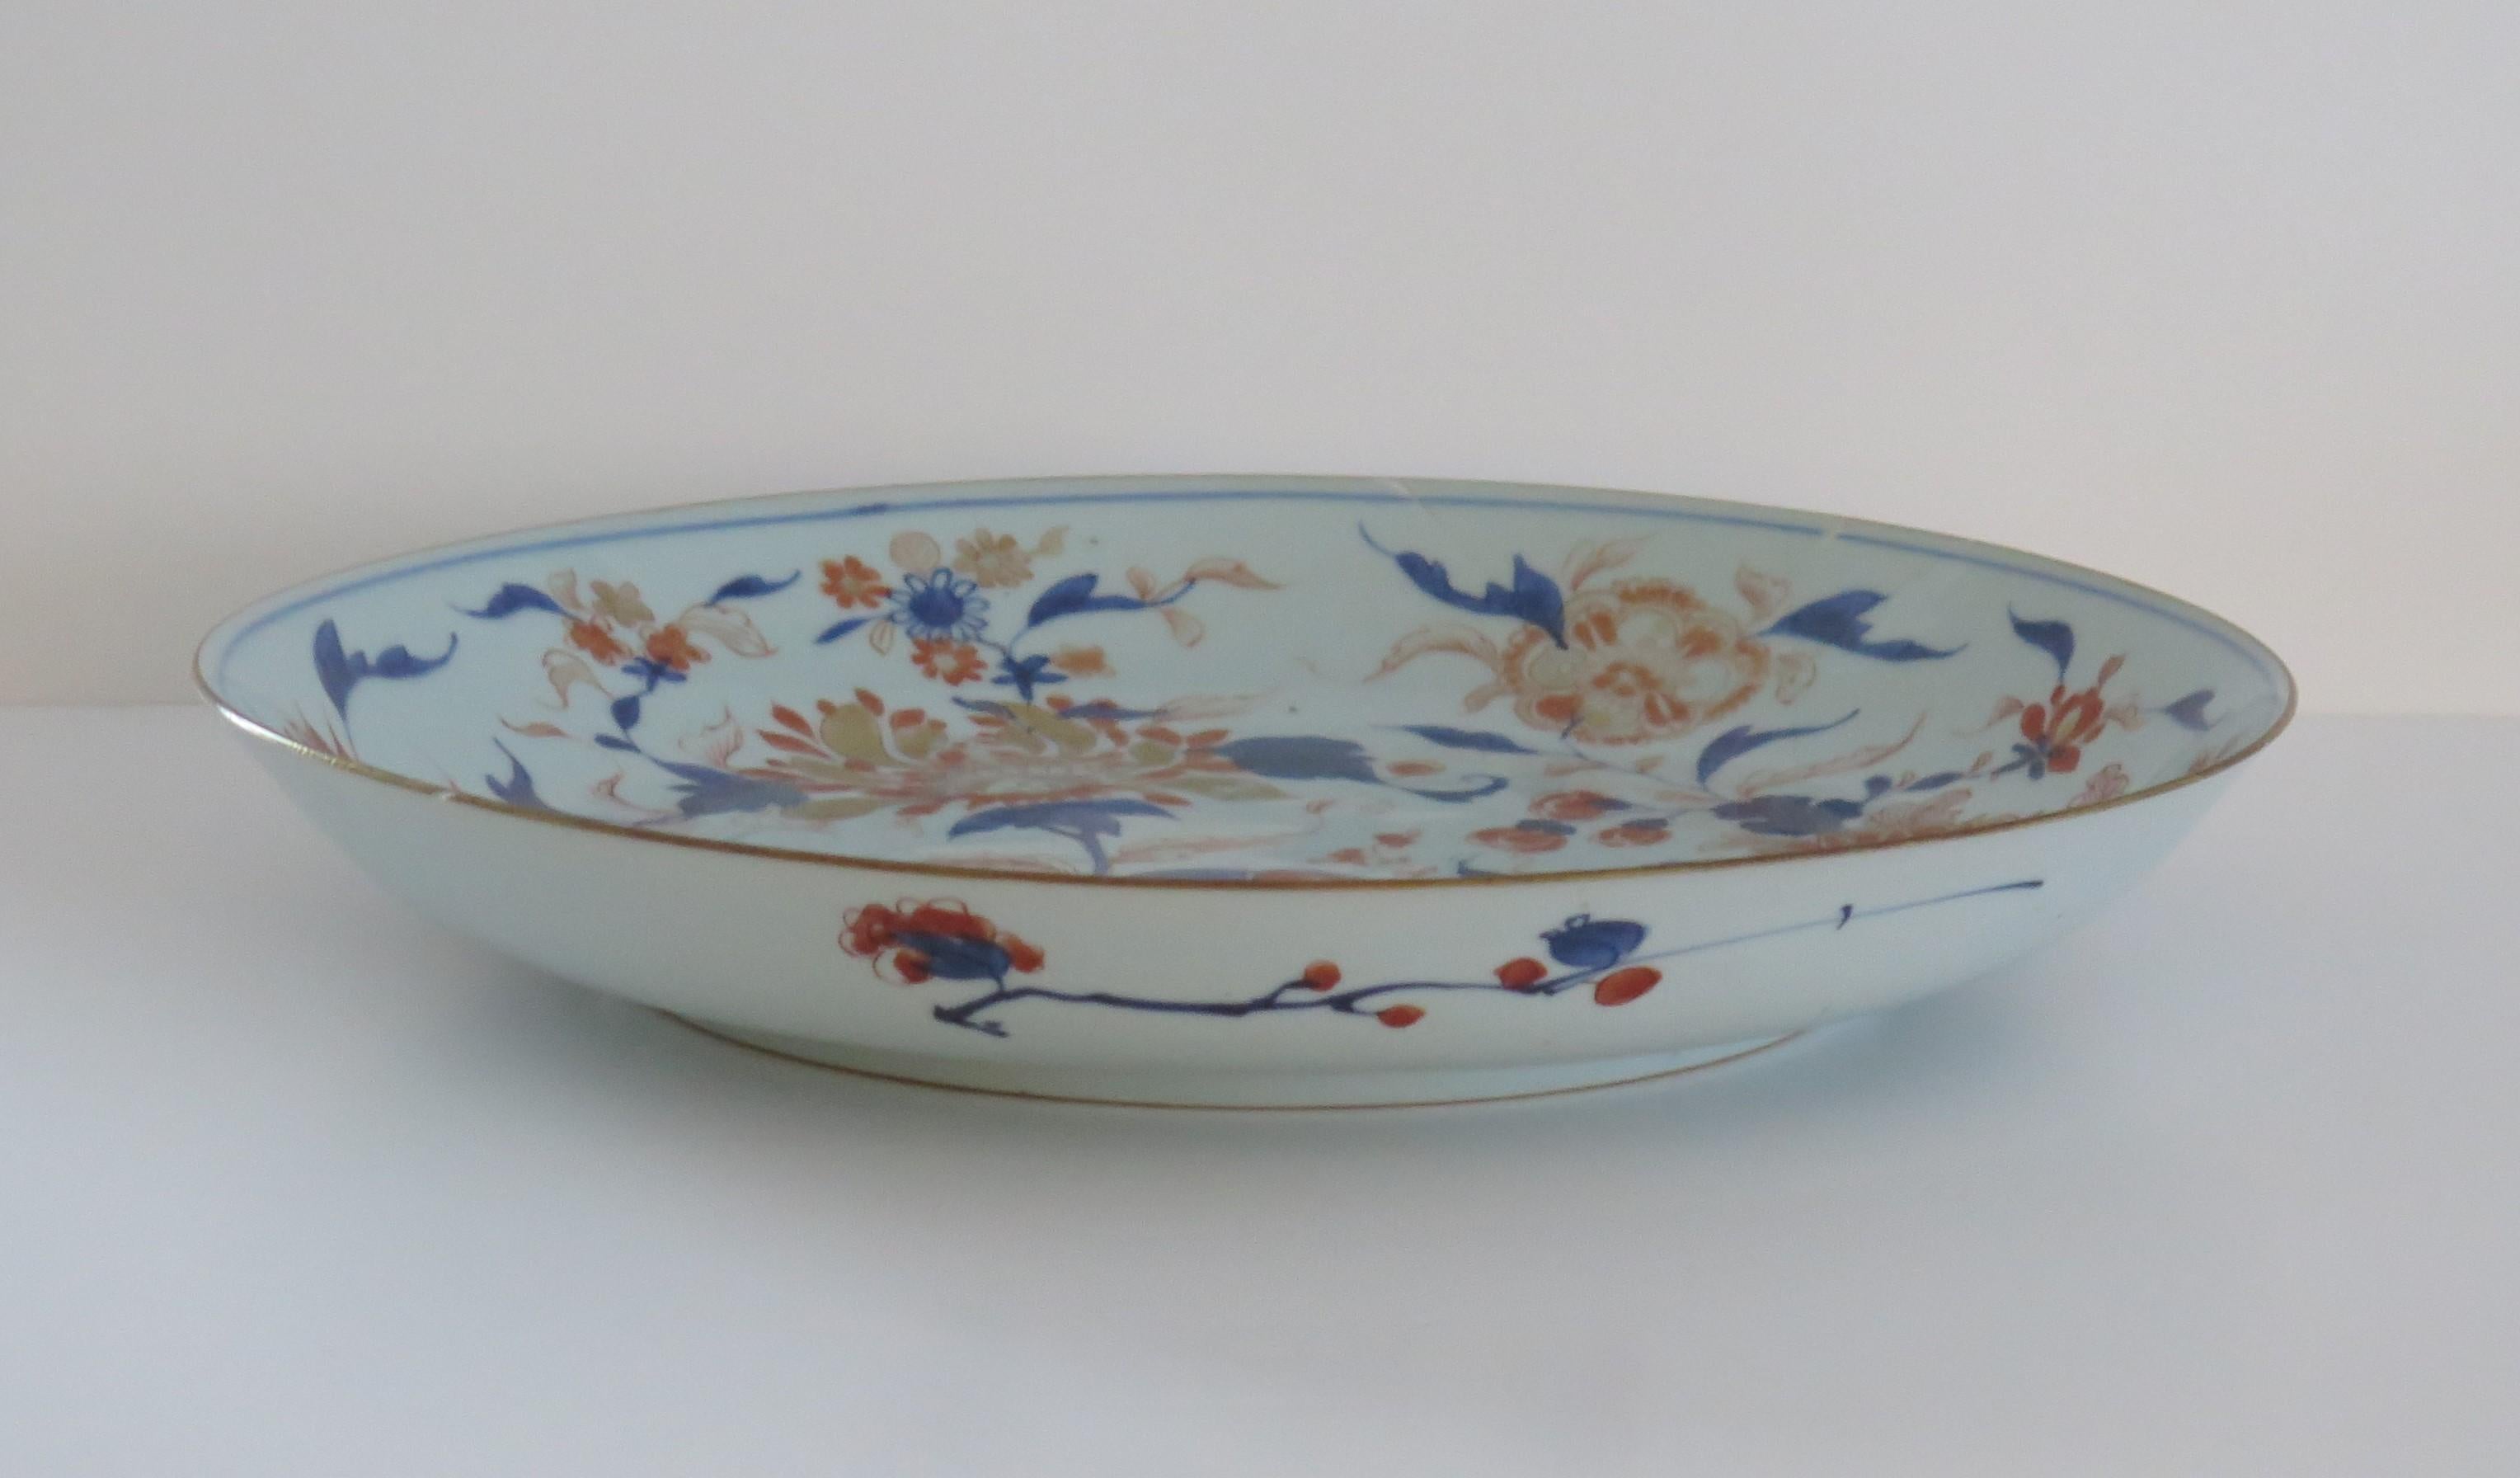 marque porcelaine chinoise